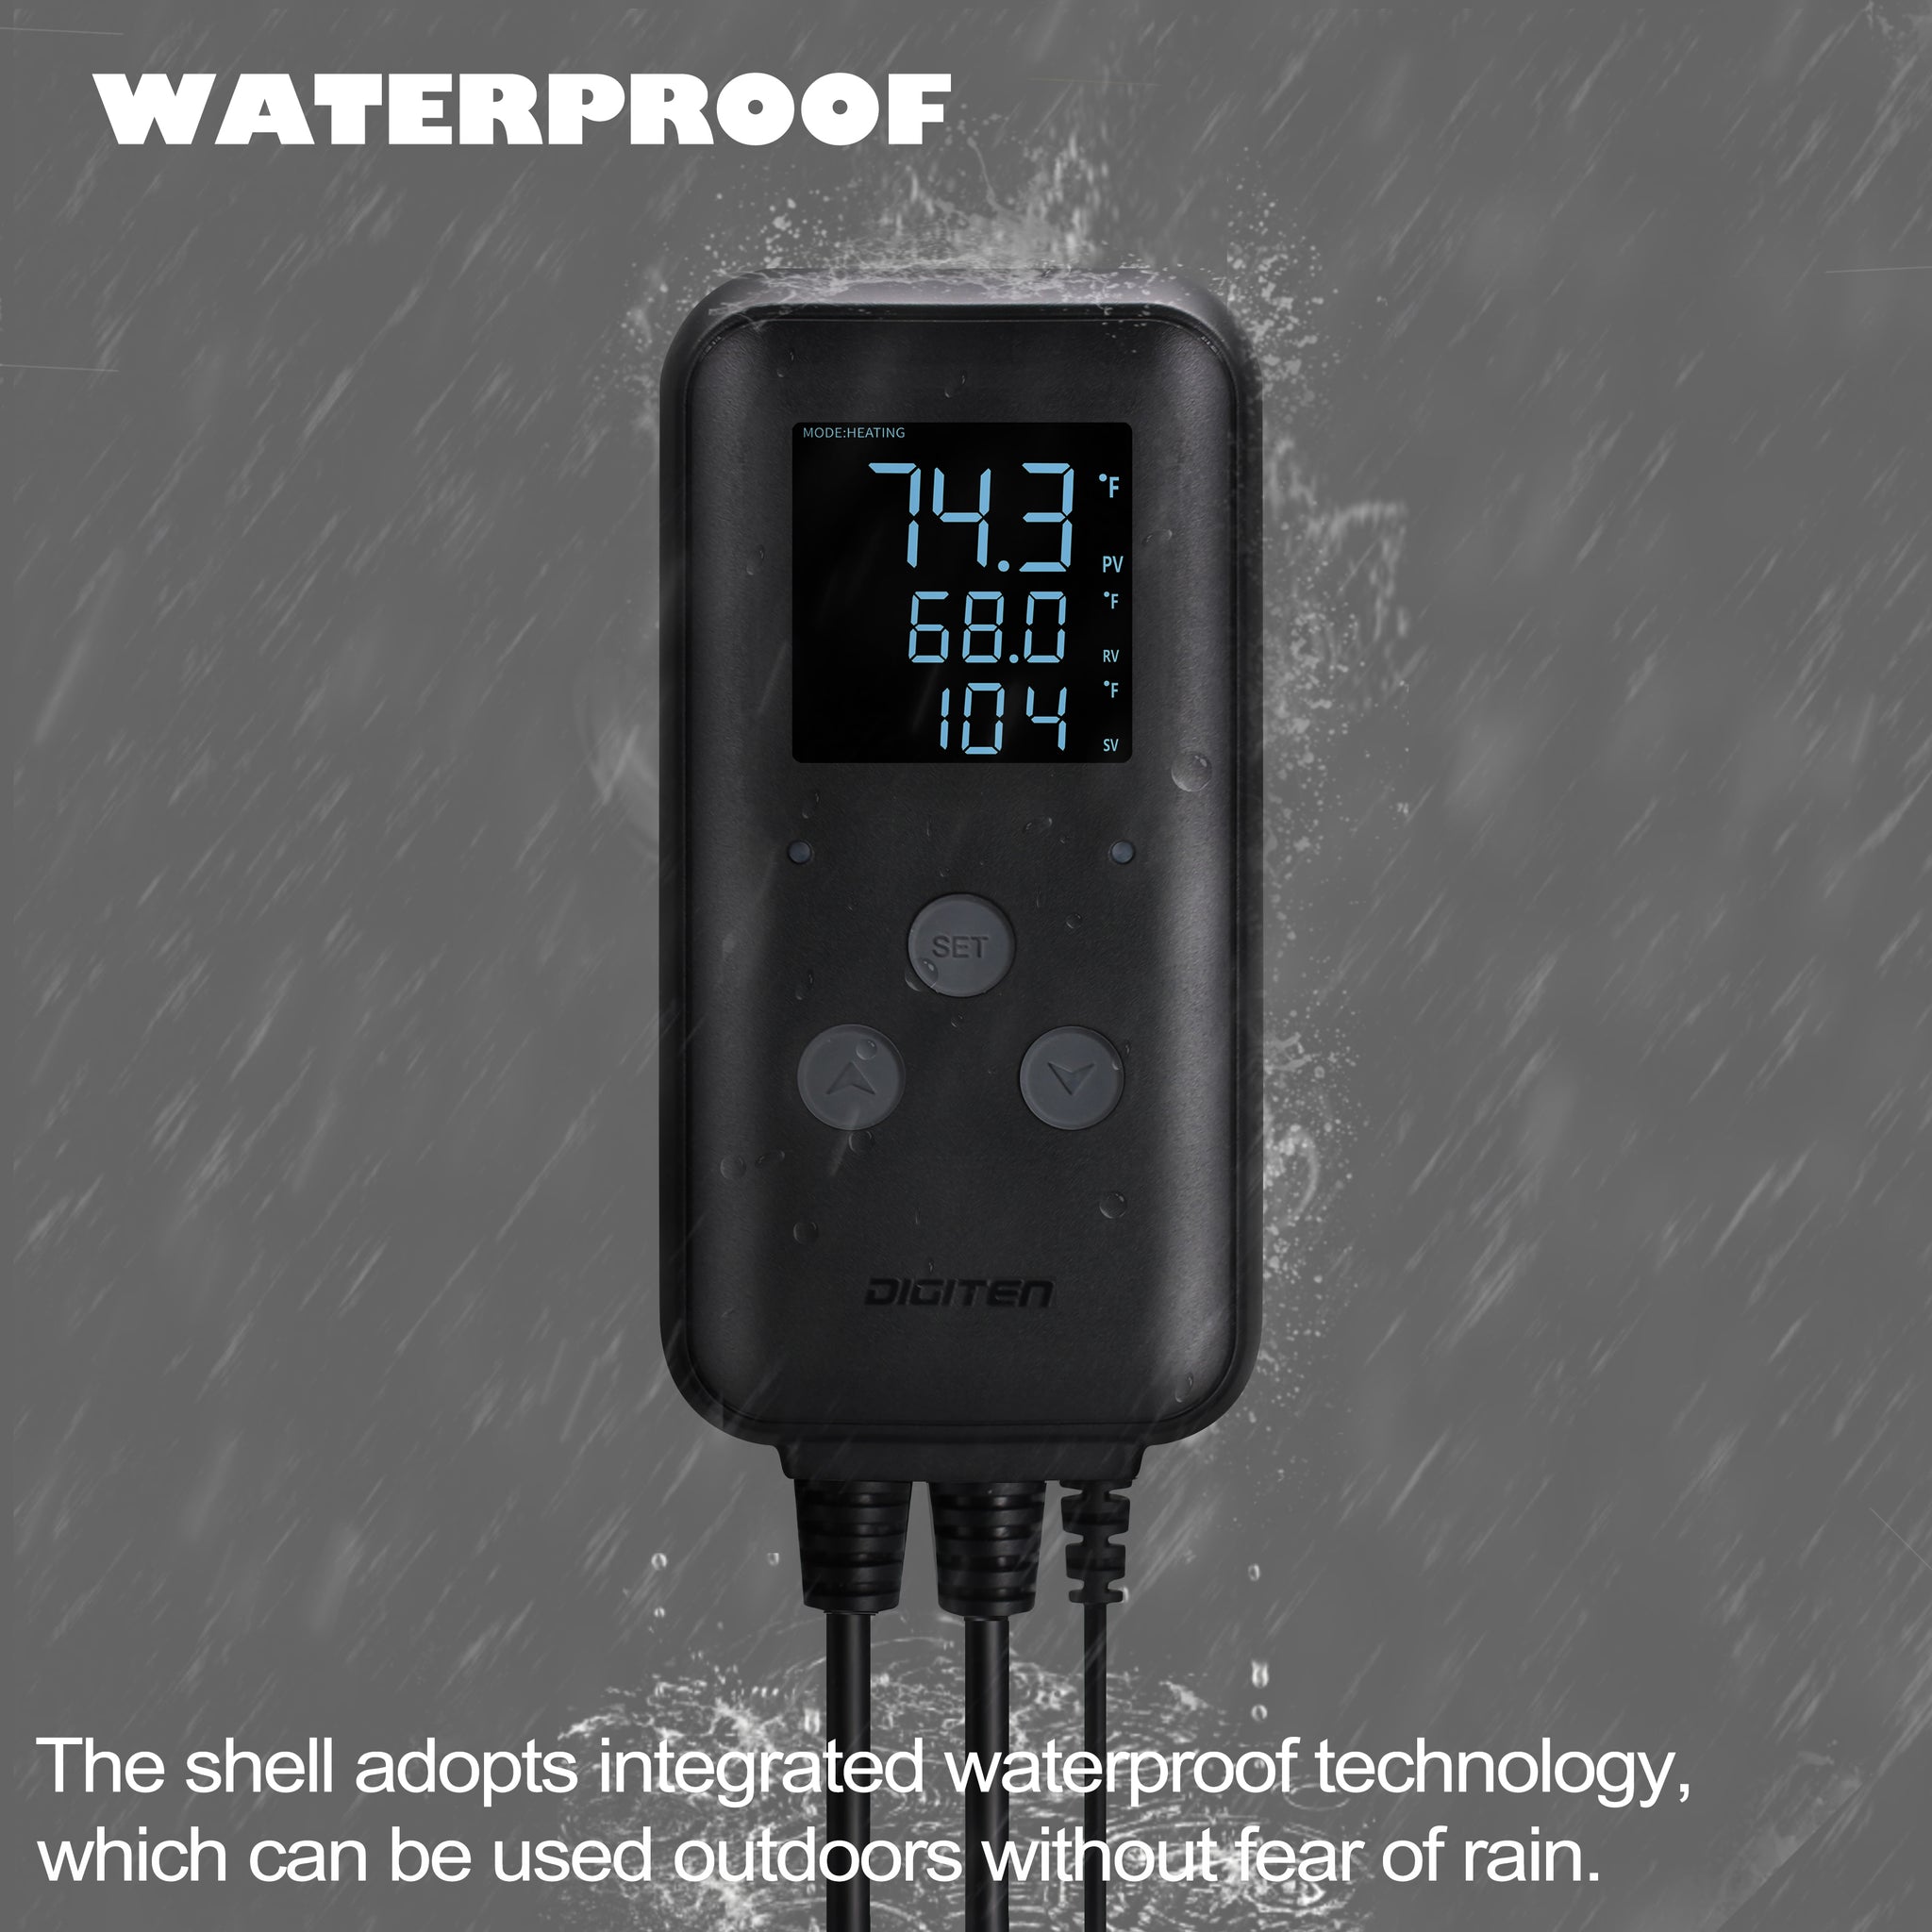 JDDT1 Adjustable Digital Thermostat (Wired) from ACF Greenhouses